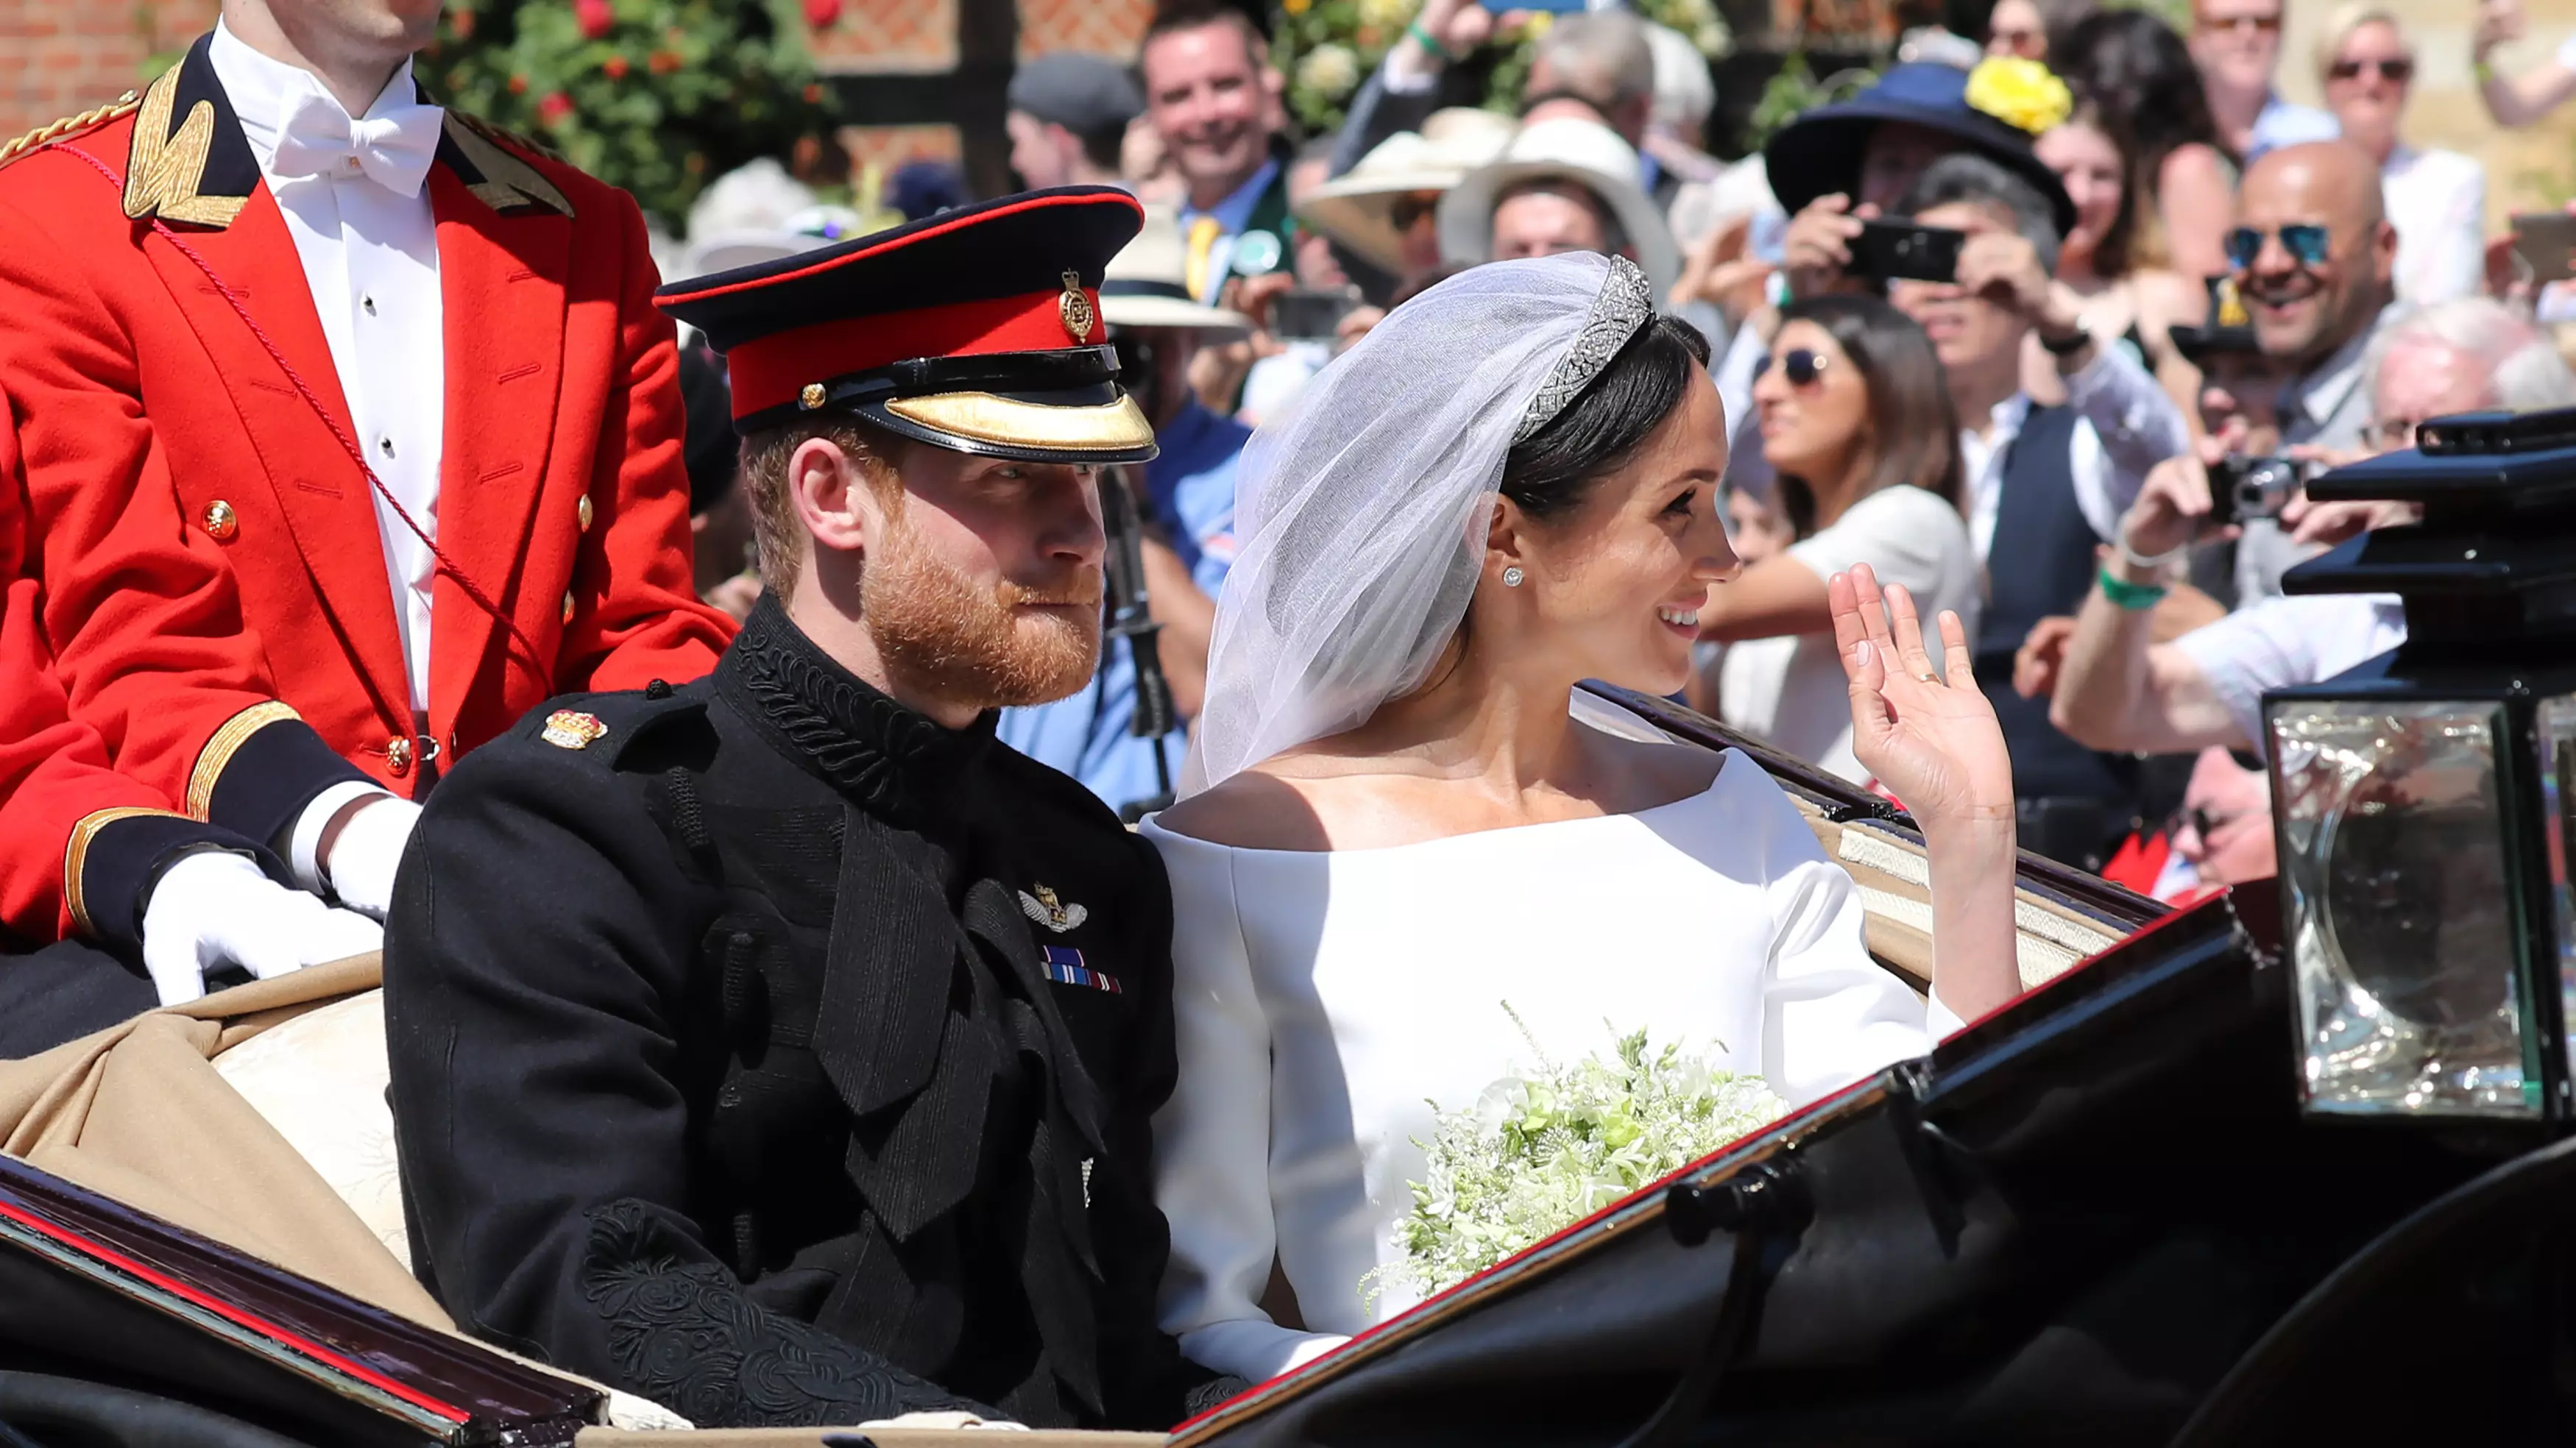 Royal Wedding 2018: Meghan Markle Spotted An Old Teacher In A Crowd Of Thousands At Her Wedding